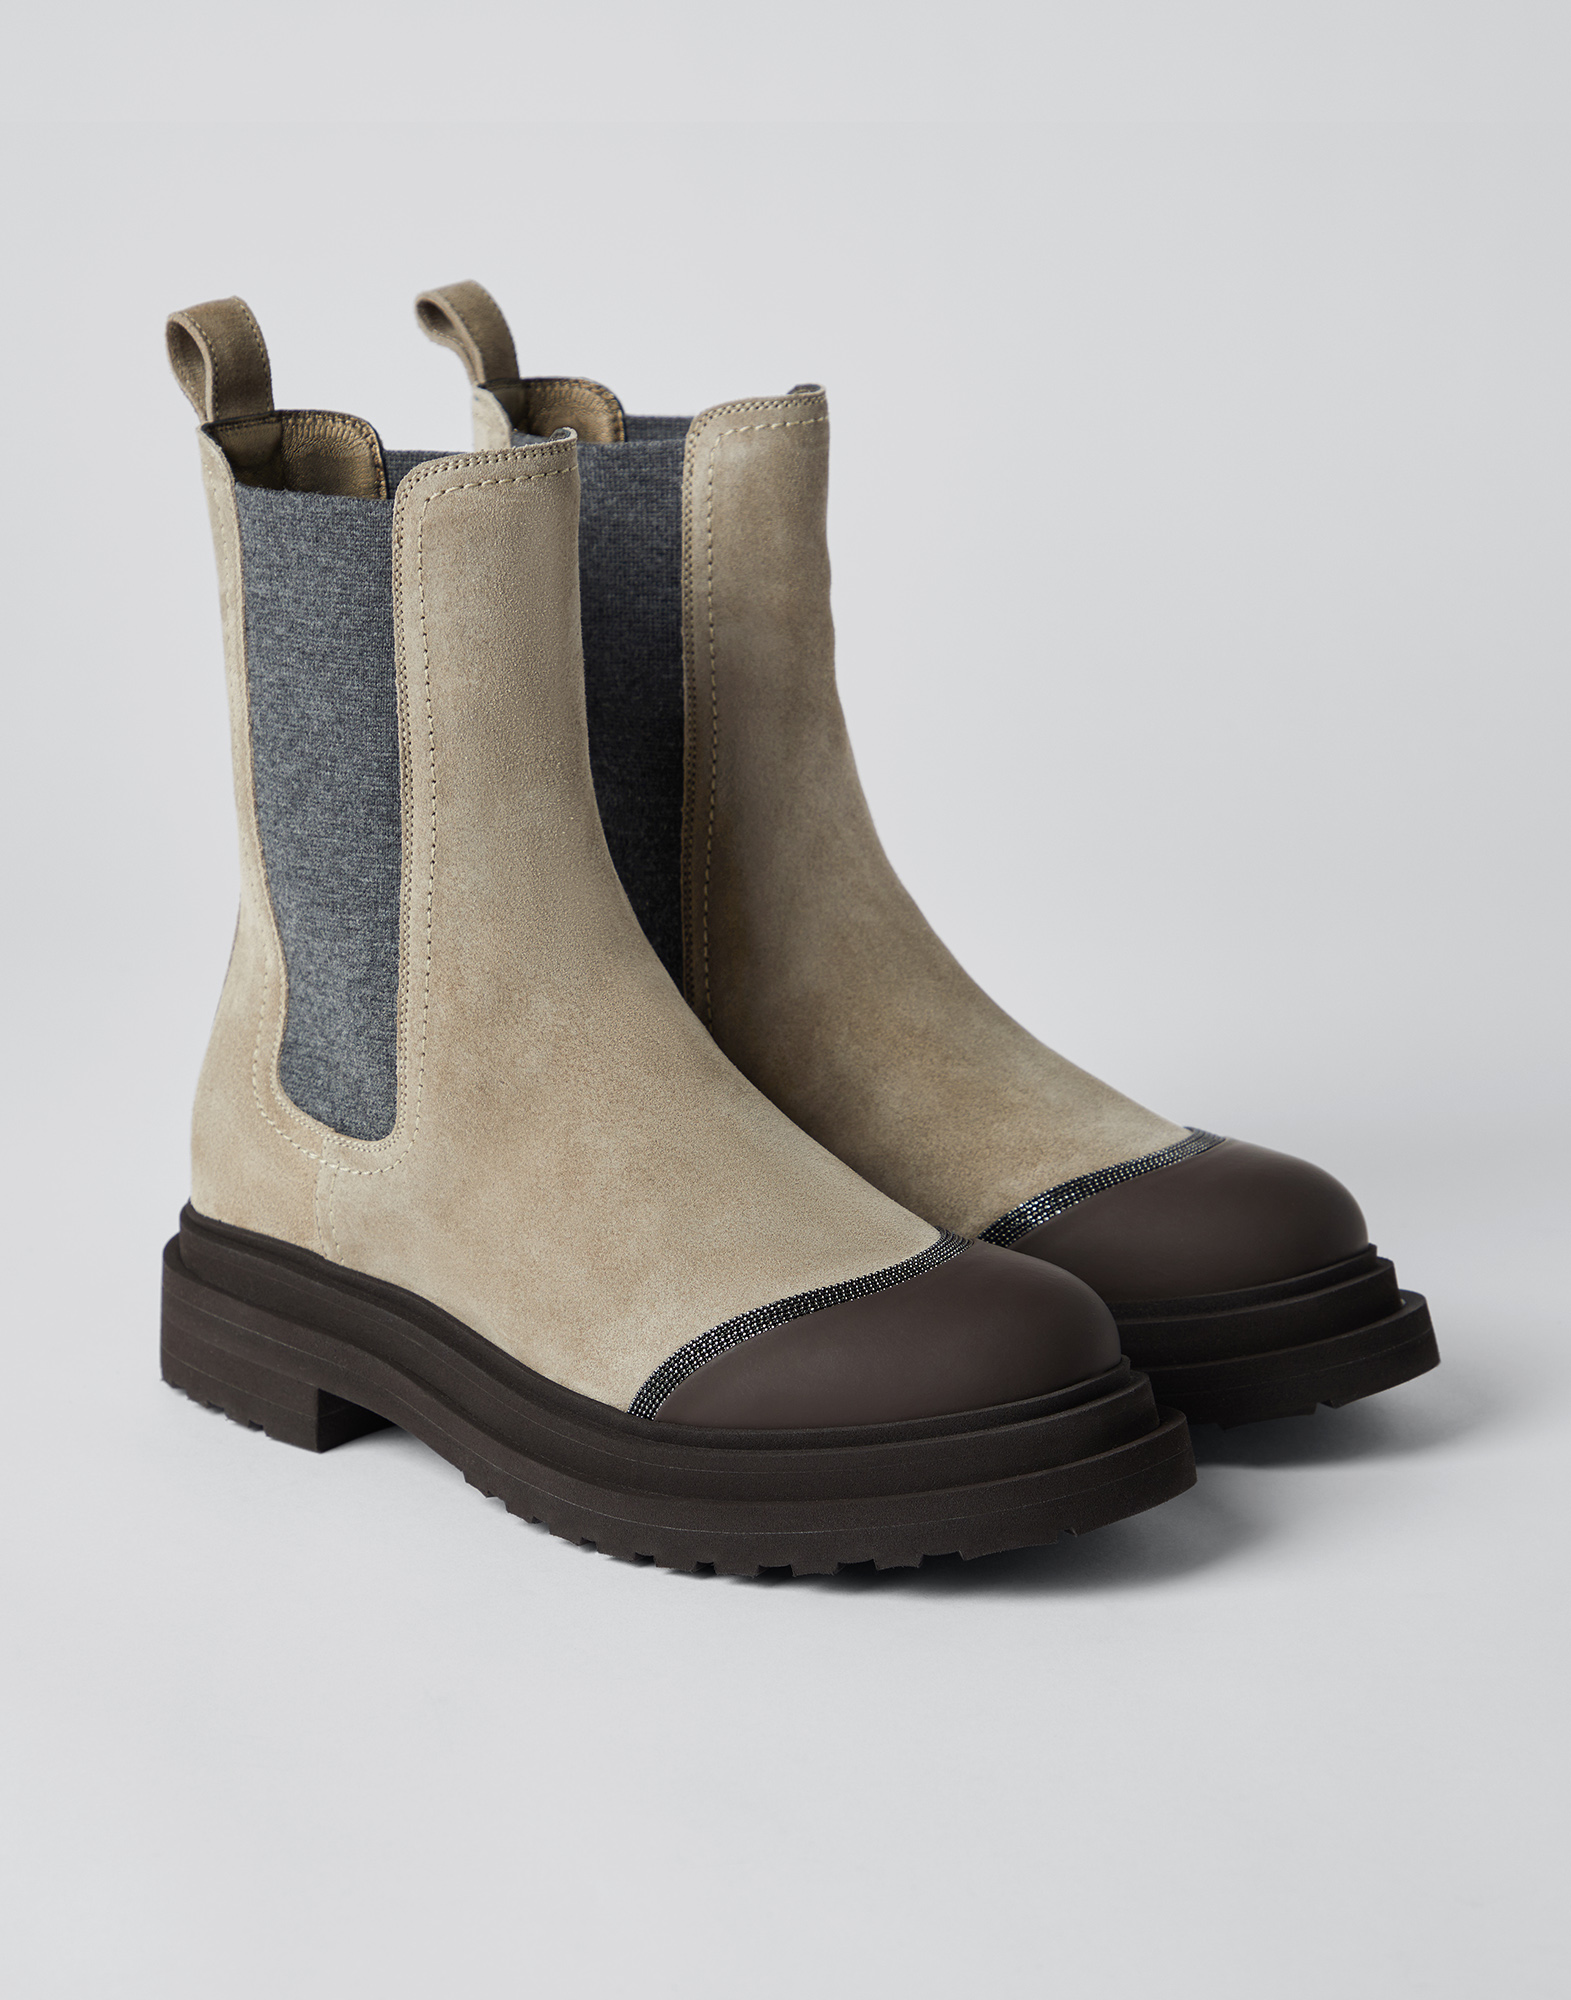 Chelsea boots with monili